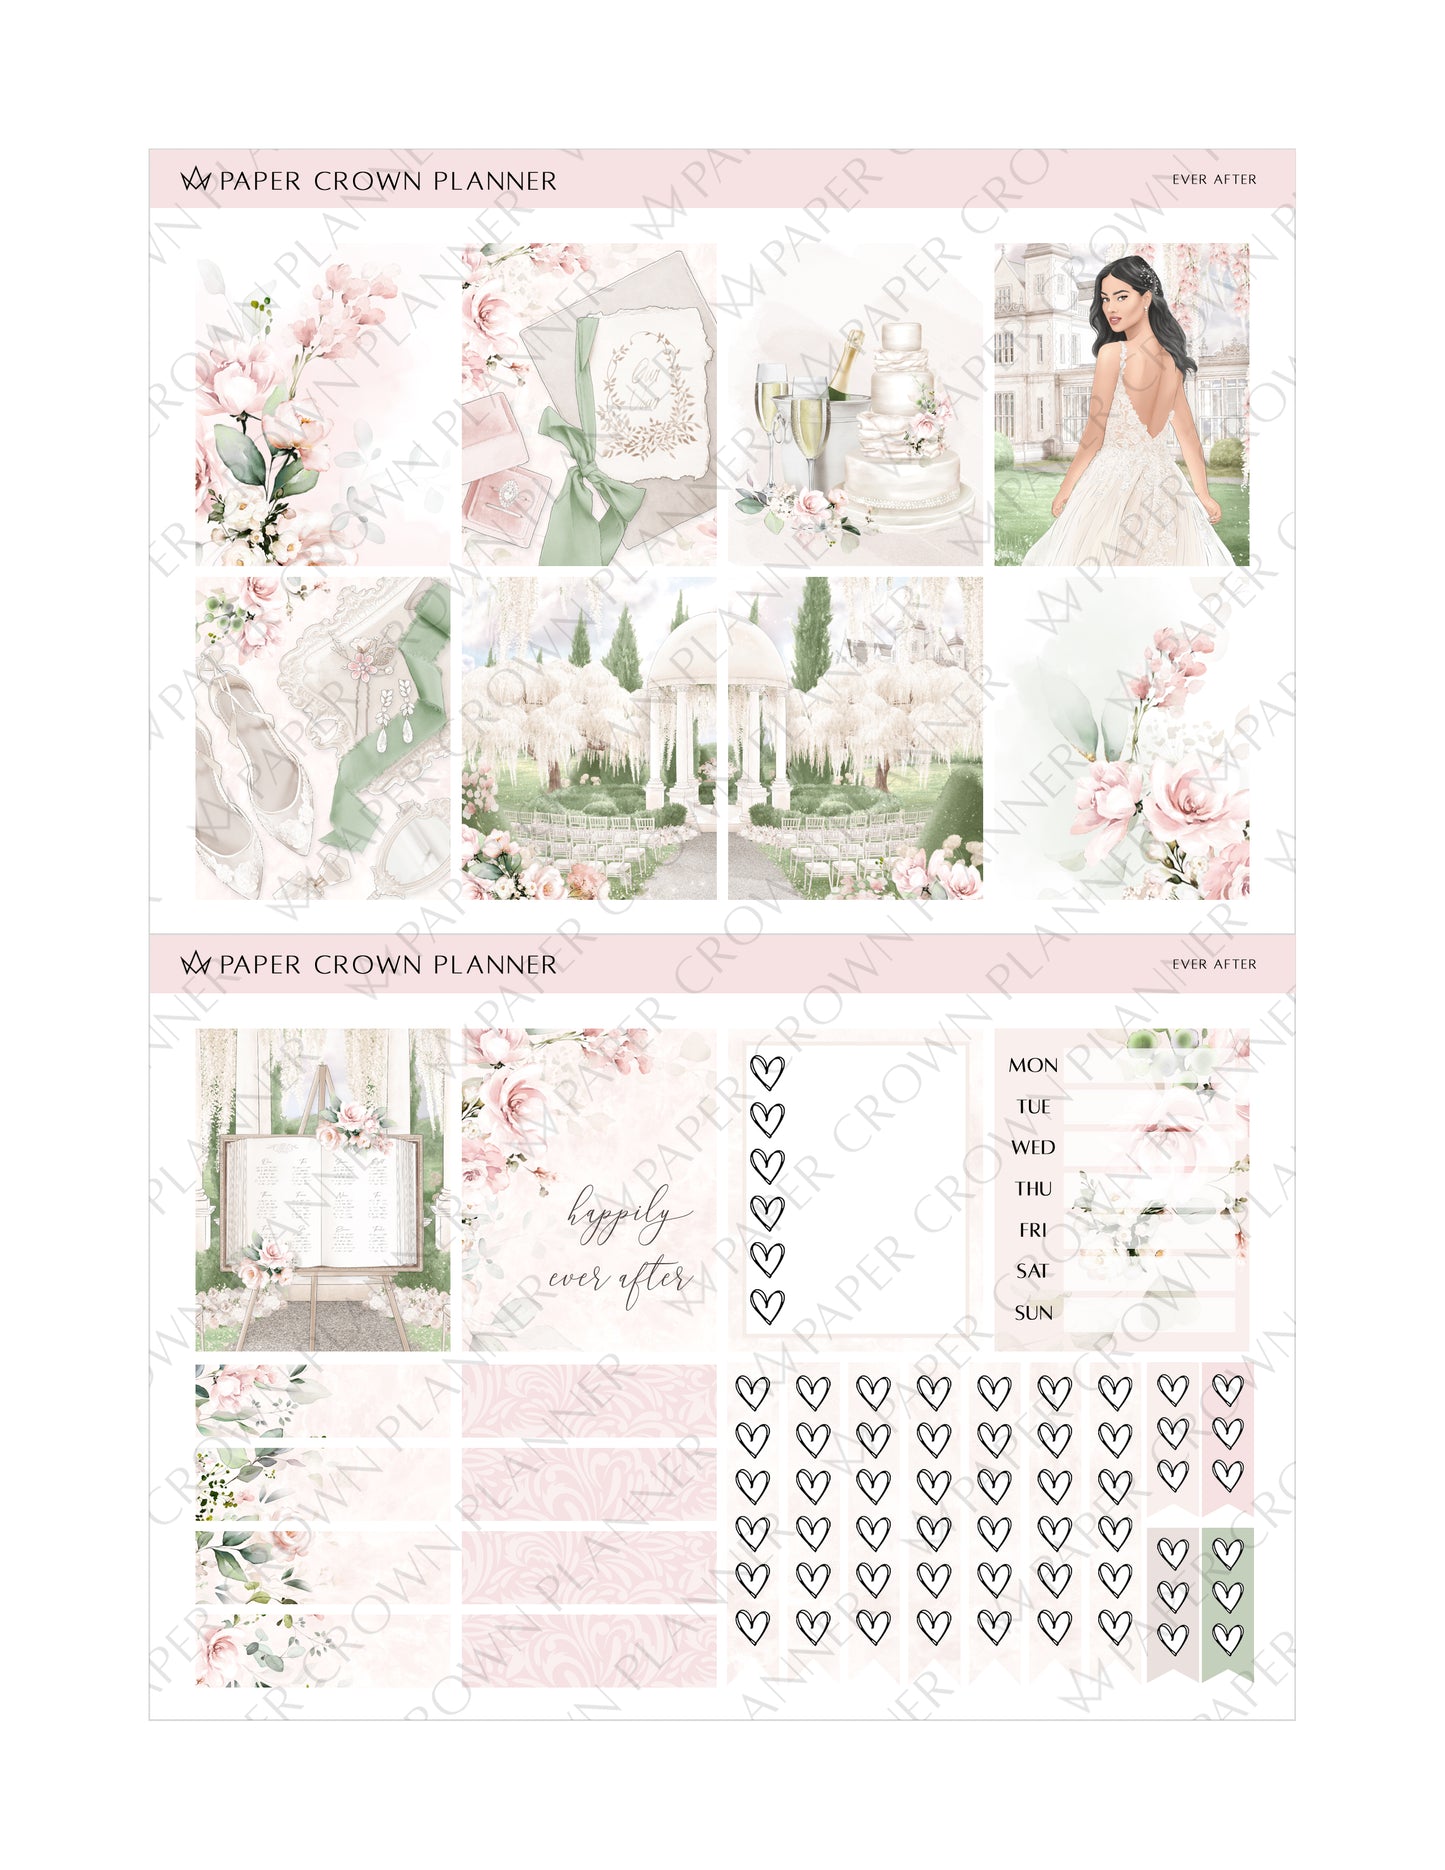 EVER AFTER // Weekly Kit